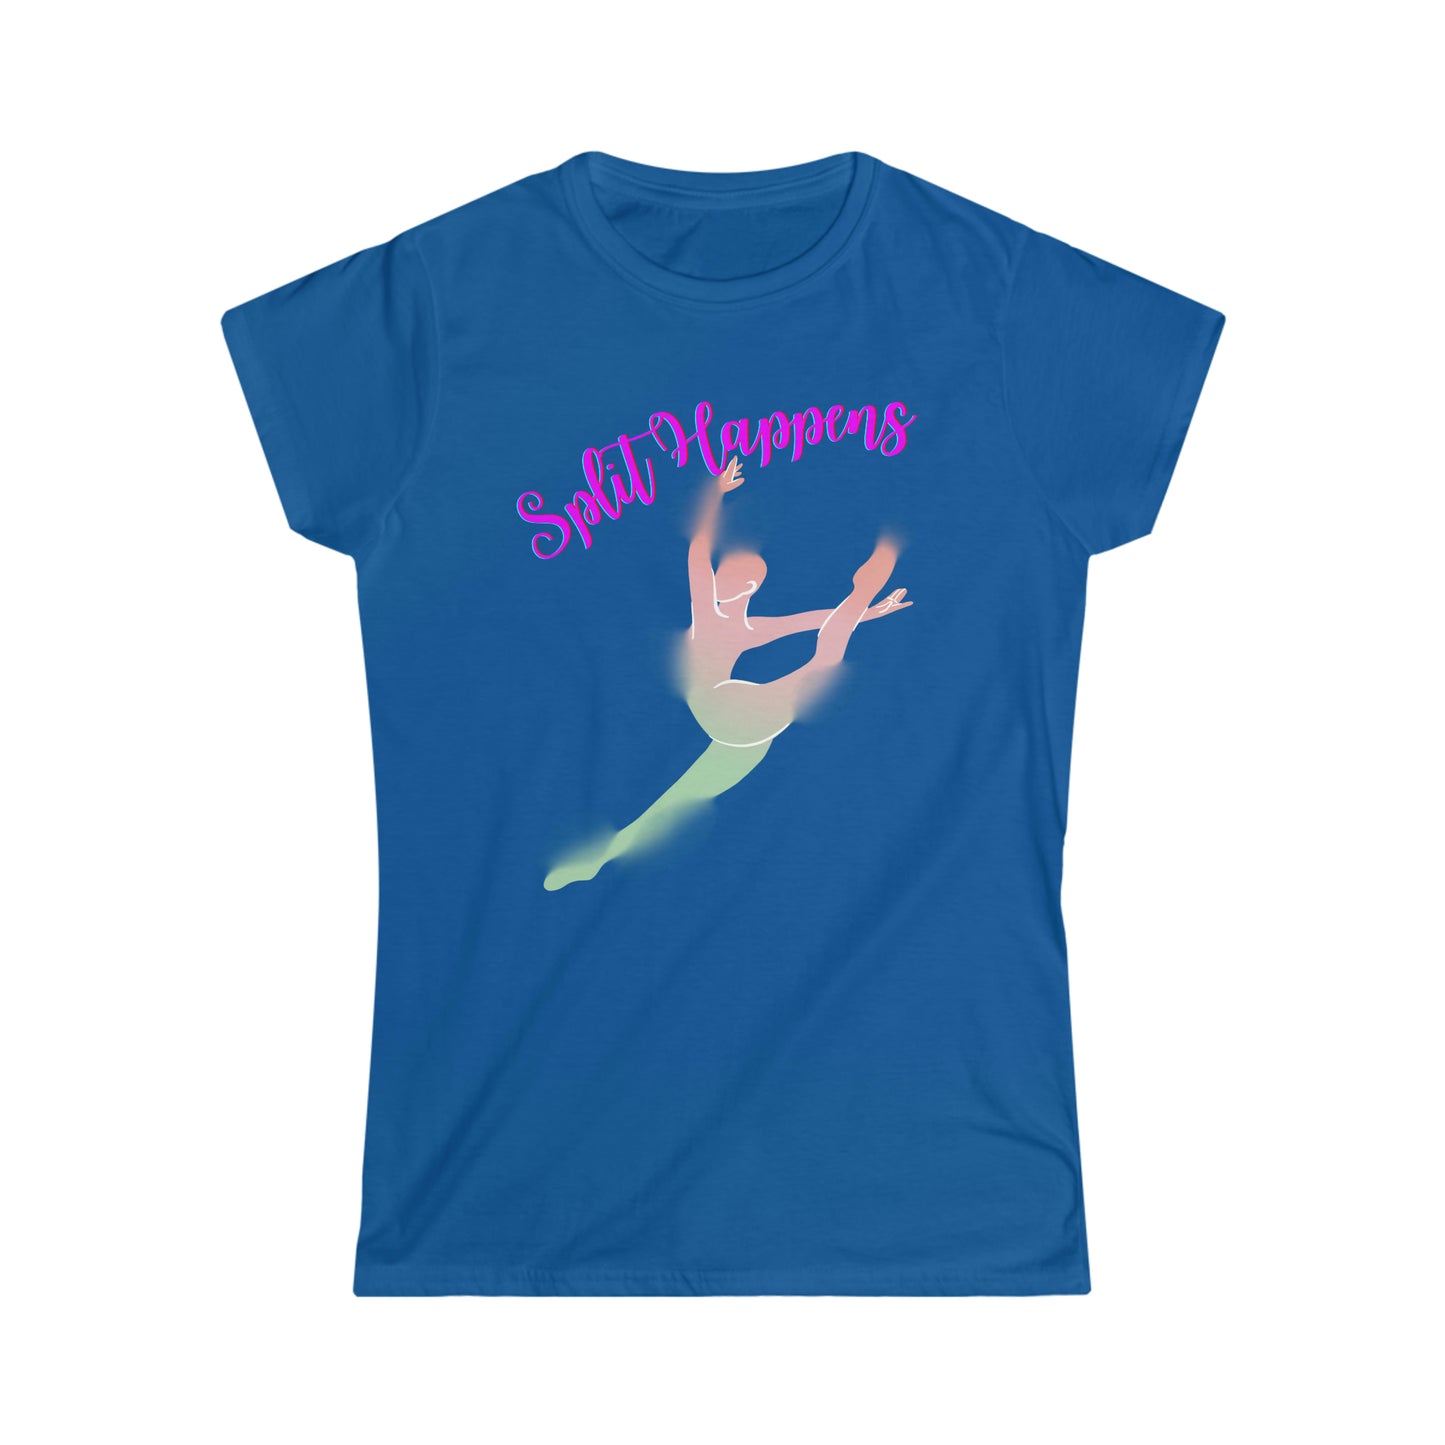 A T-shirt with the text "Split happens" and a picture of a ballerina doing the splits